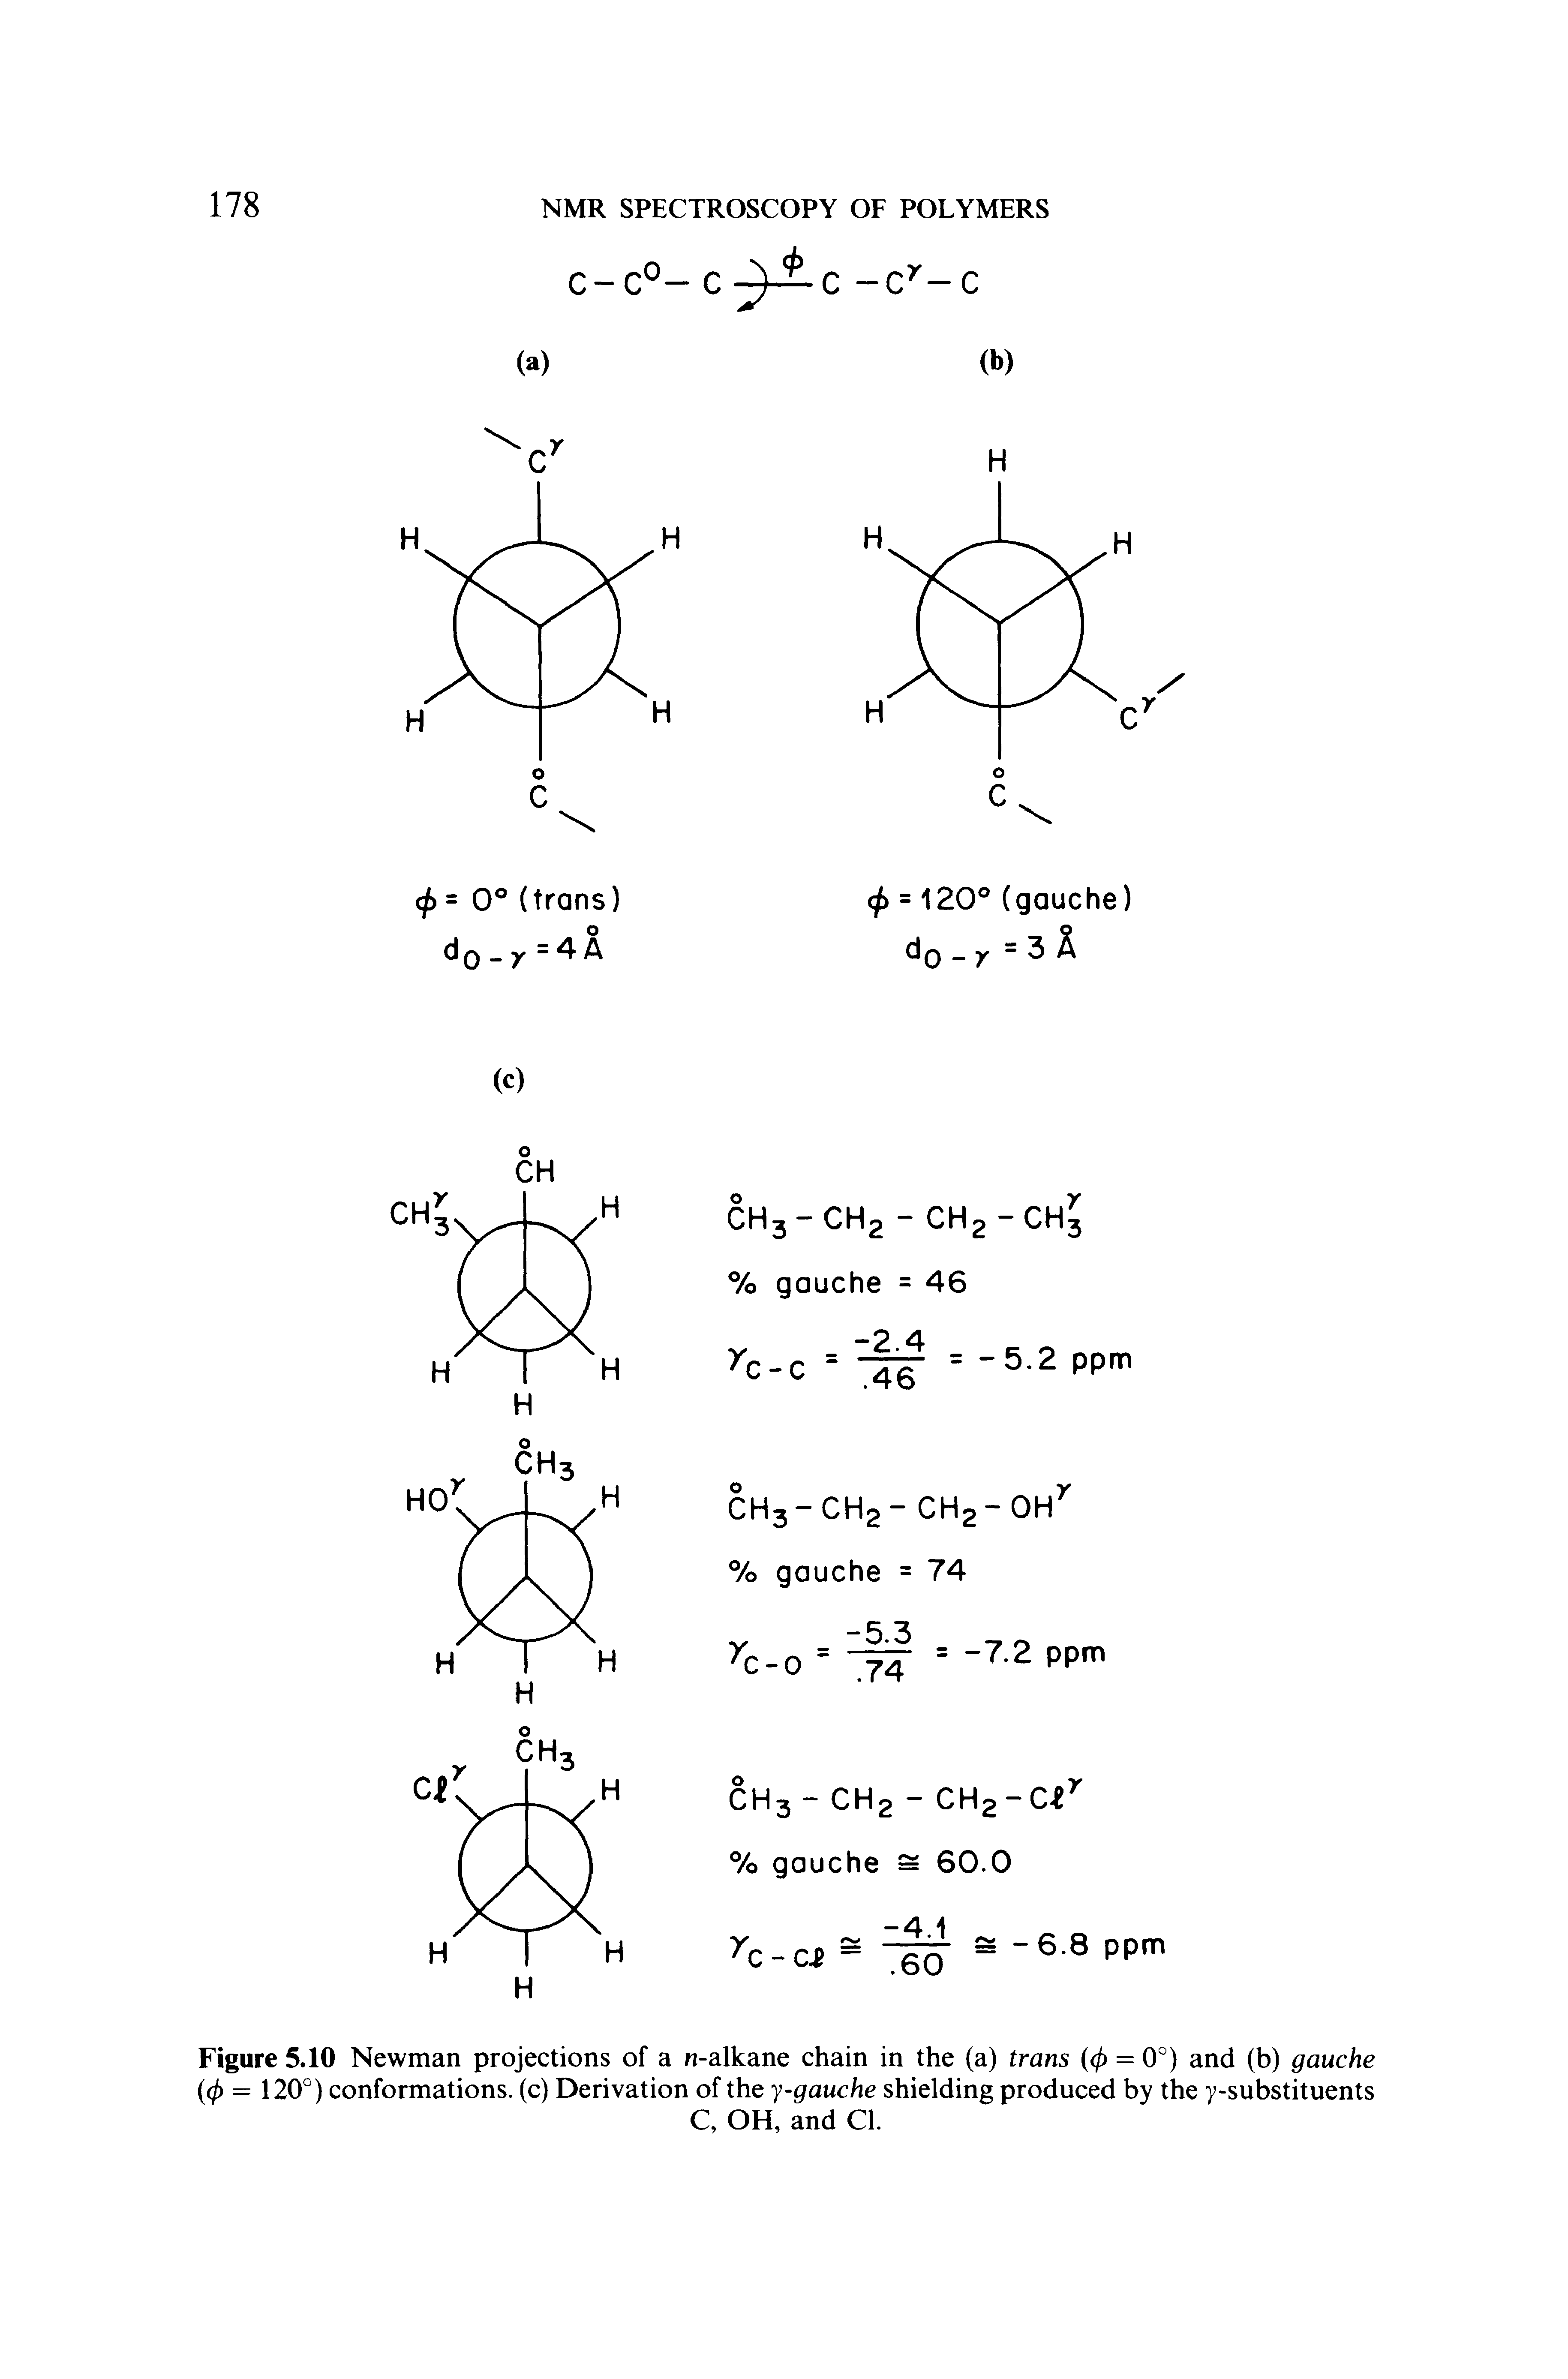 Figure 5.10 Newman projections of a n-alkane chain in the (a) trans ((/> = 0°) and (b) gauche ((j) = 120°) conformations, (c) Derivation of the y-gauche shielding produced by the y-substituents...